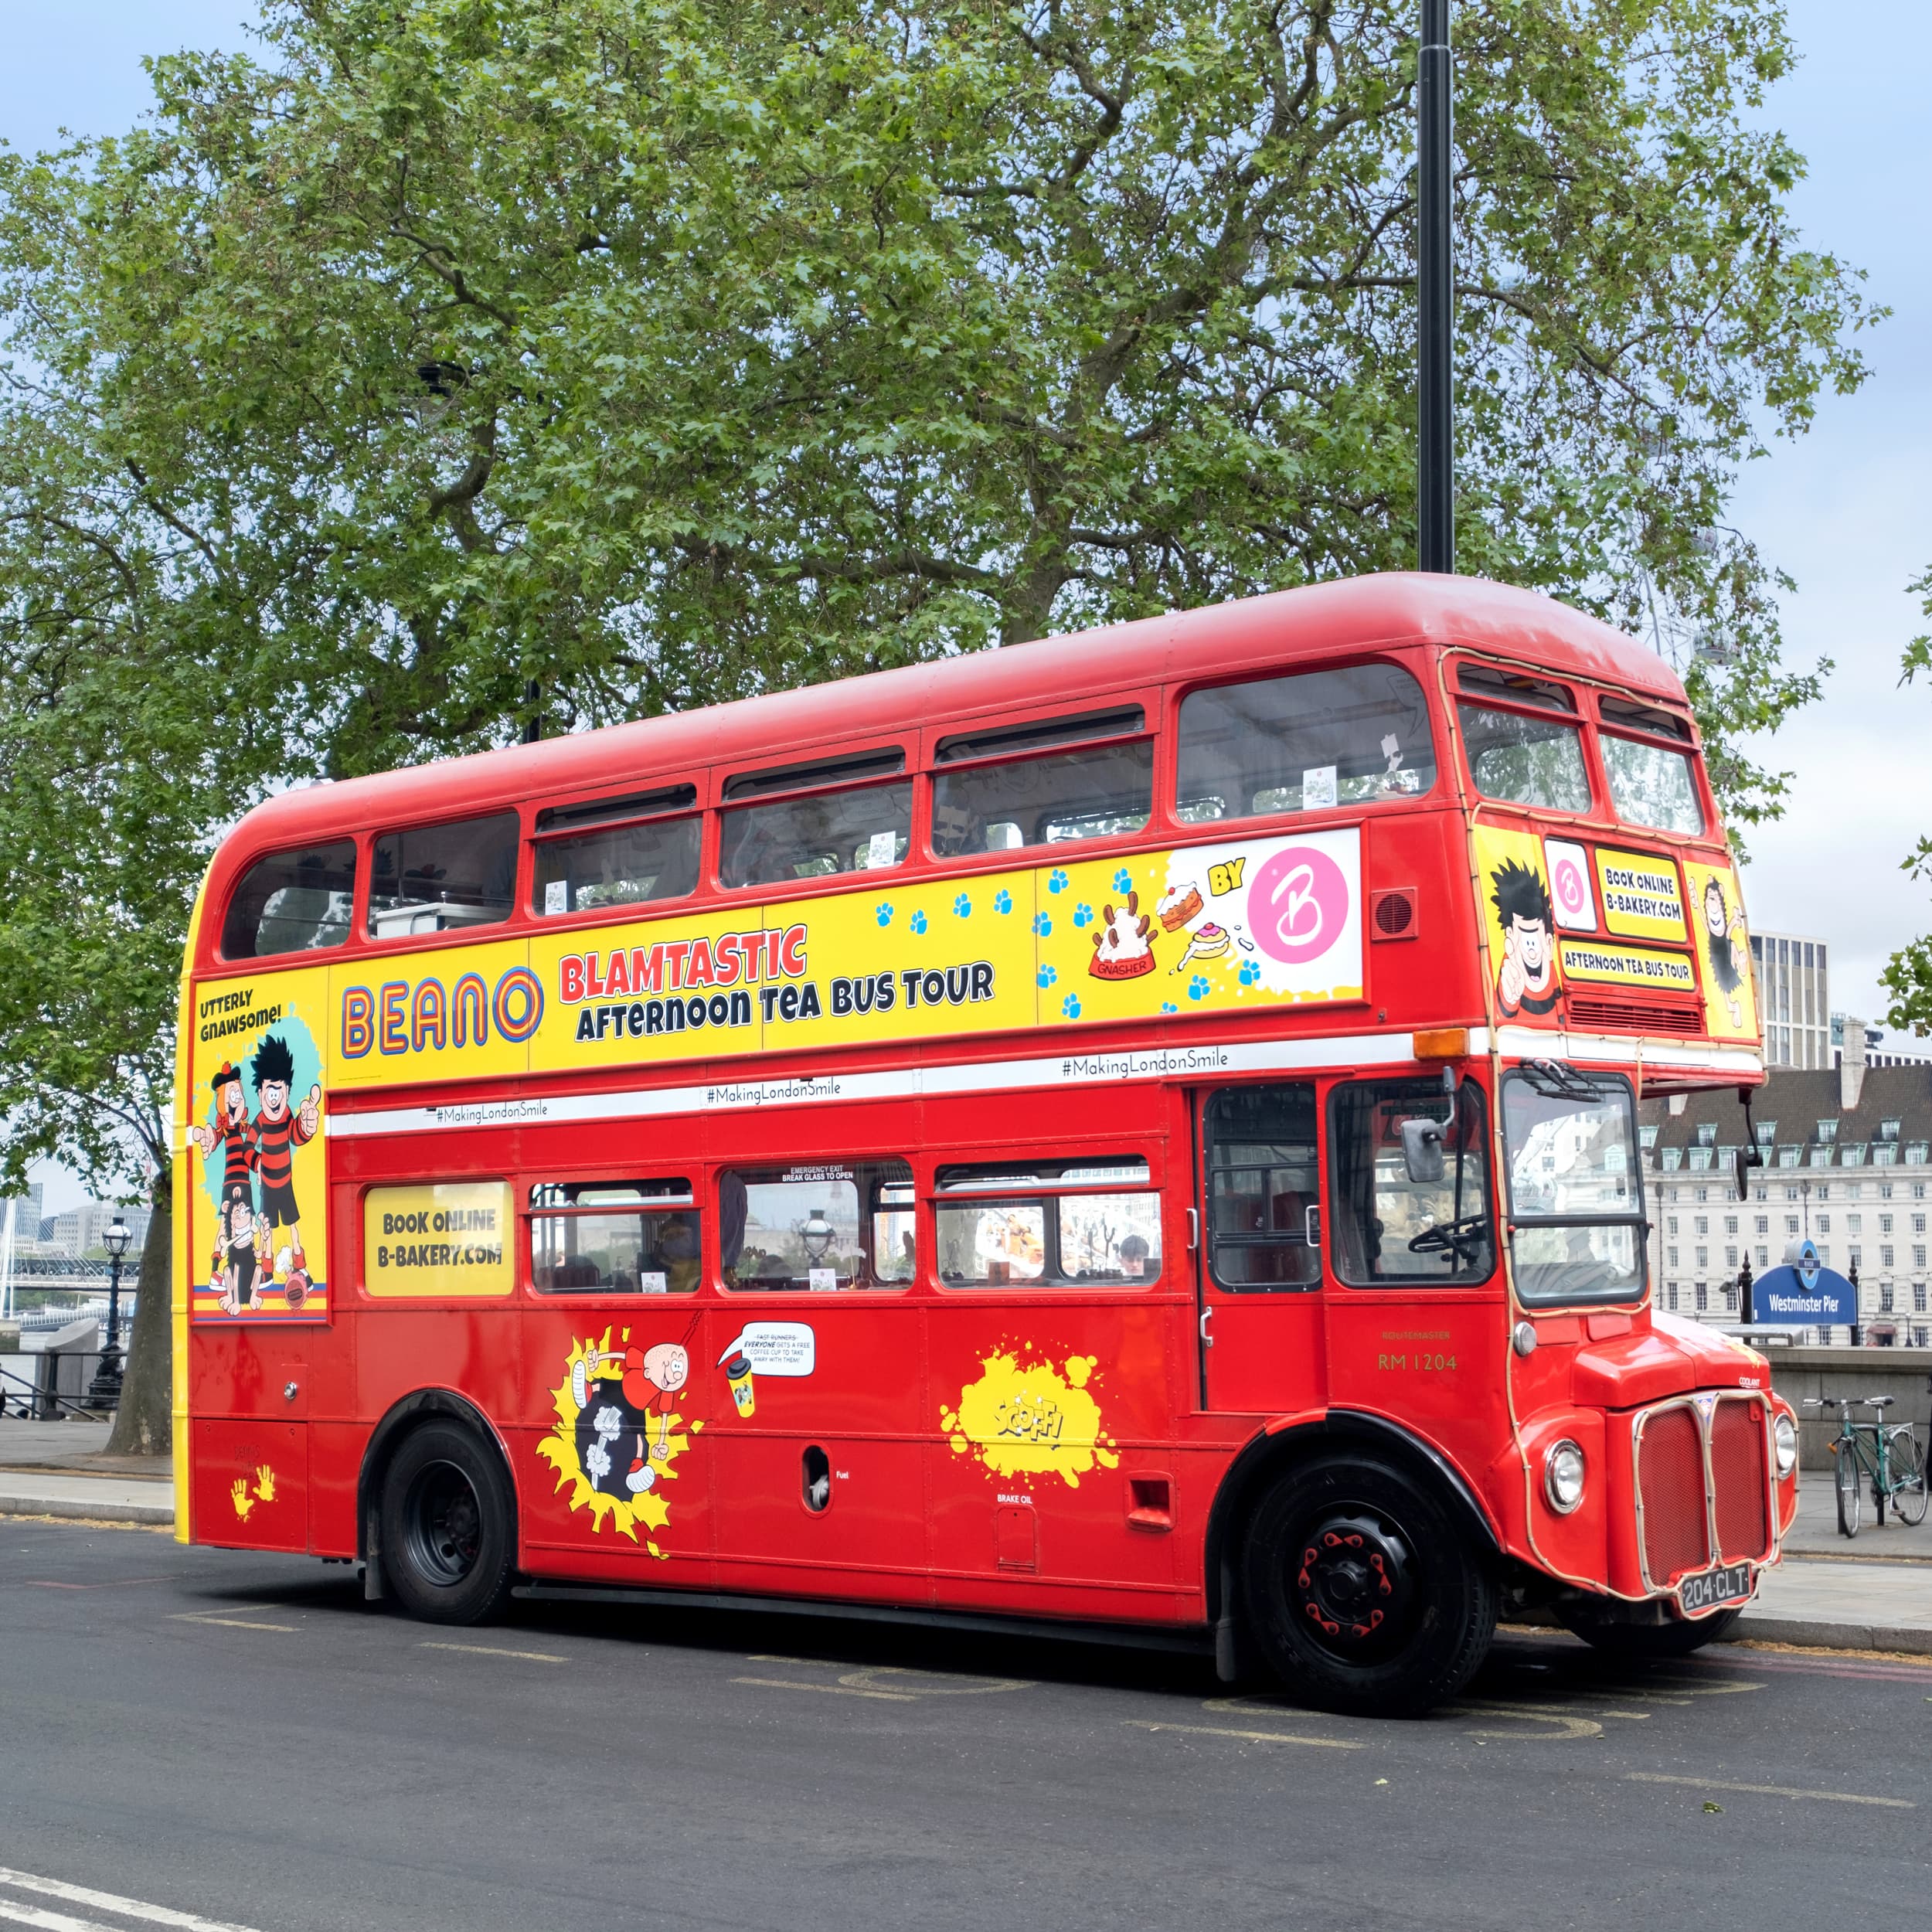 Beano Afternoon Tea Bus Tour launches for Summer 2023